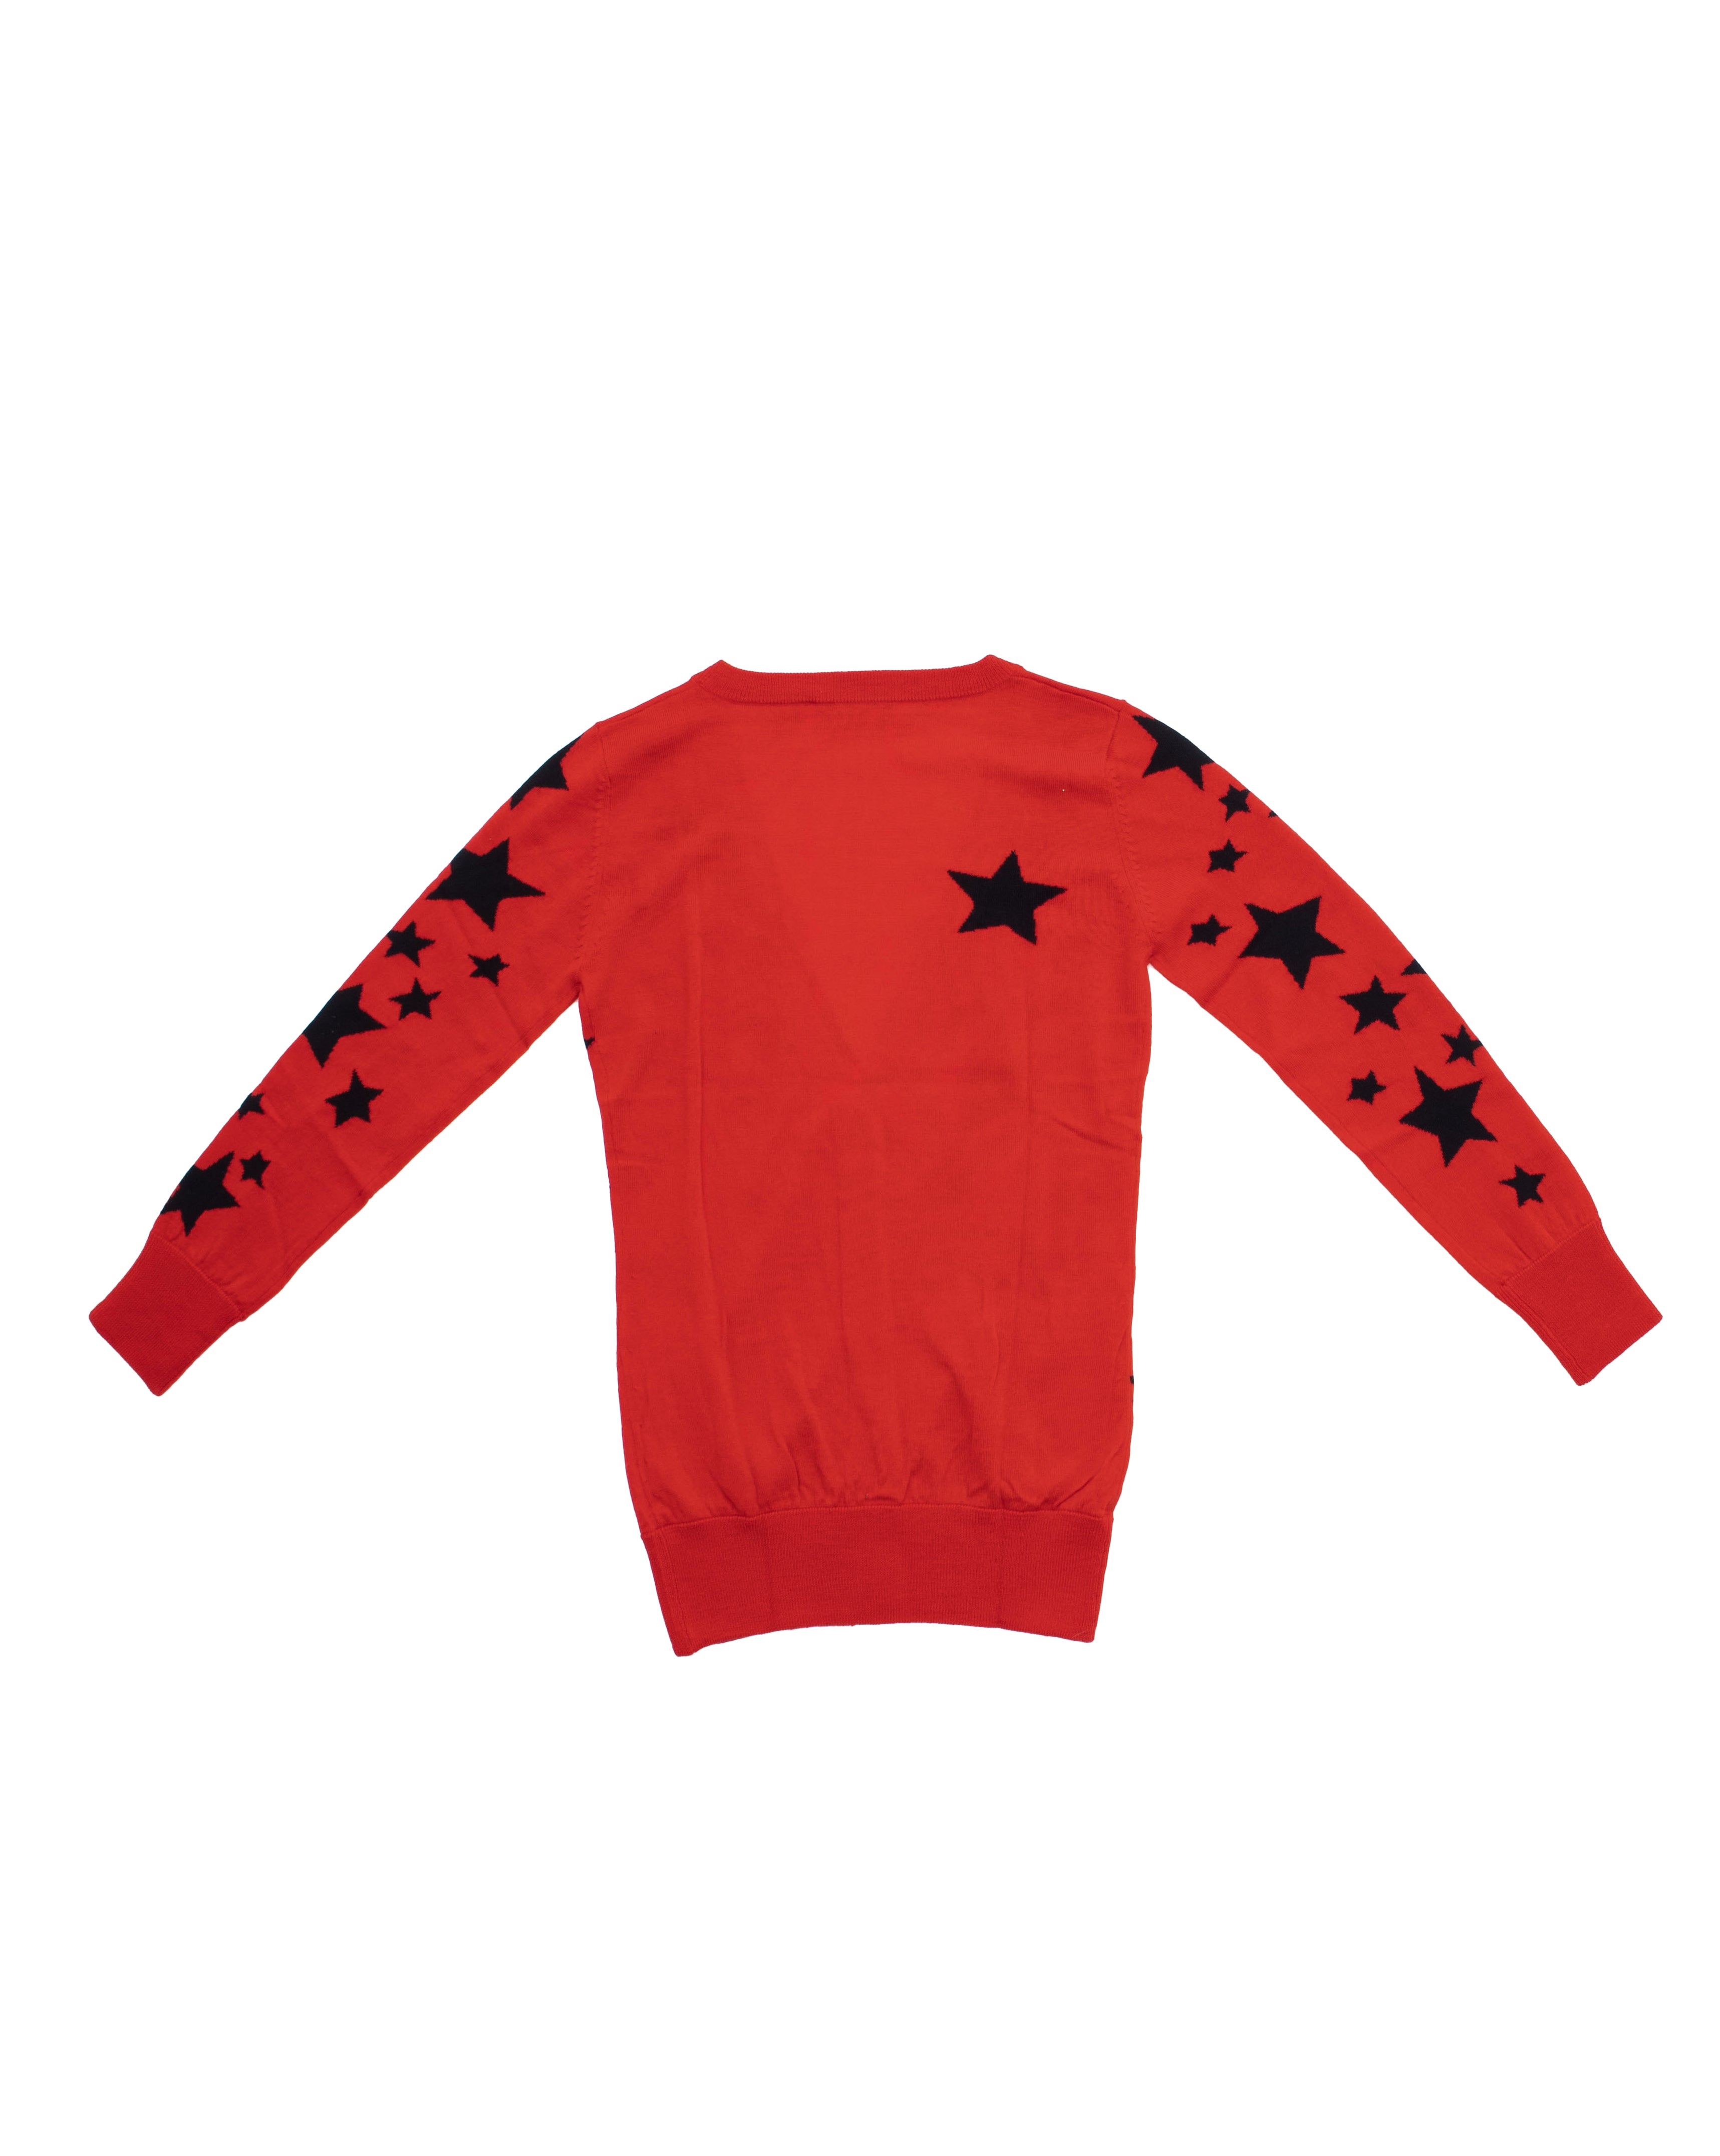 Red Cardigan With Black Stars